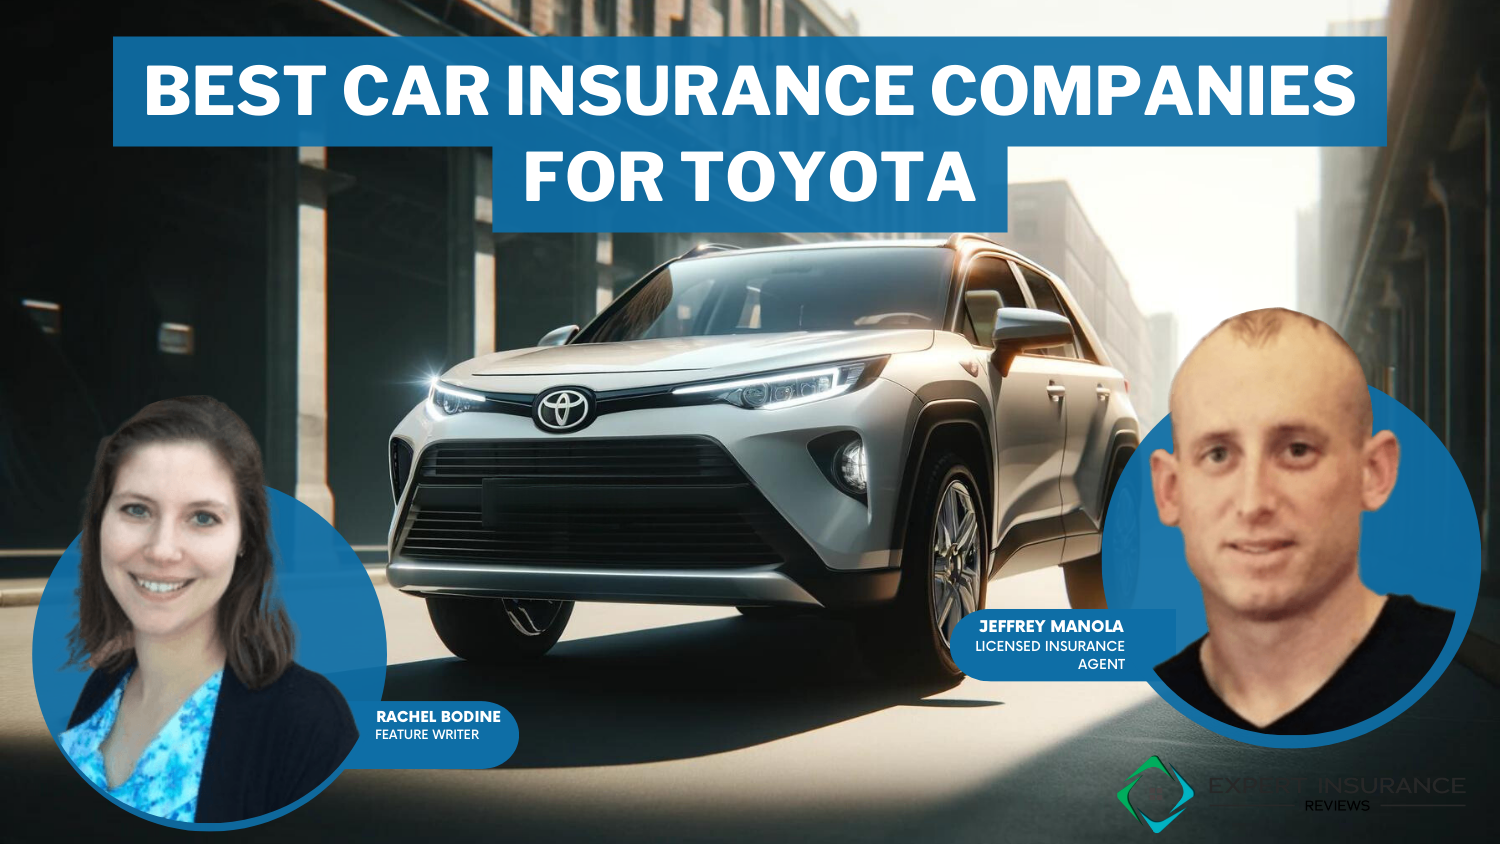 best car insurance companies for Toyotas: Geico, Allstate, and Liberty Mutual